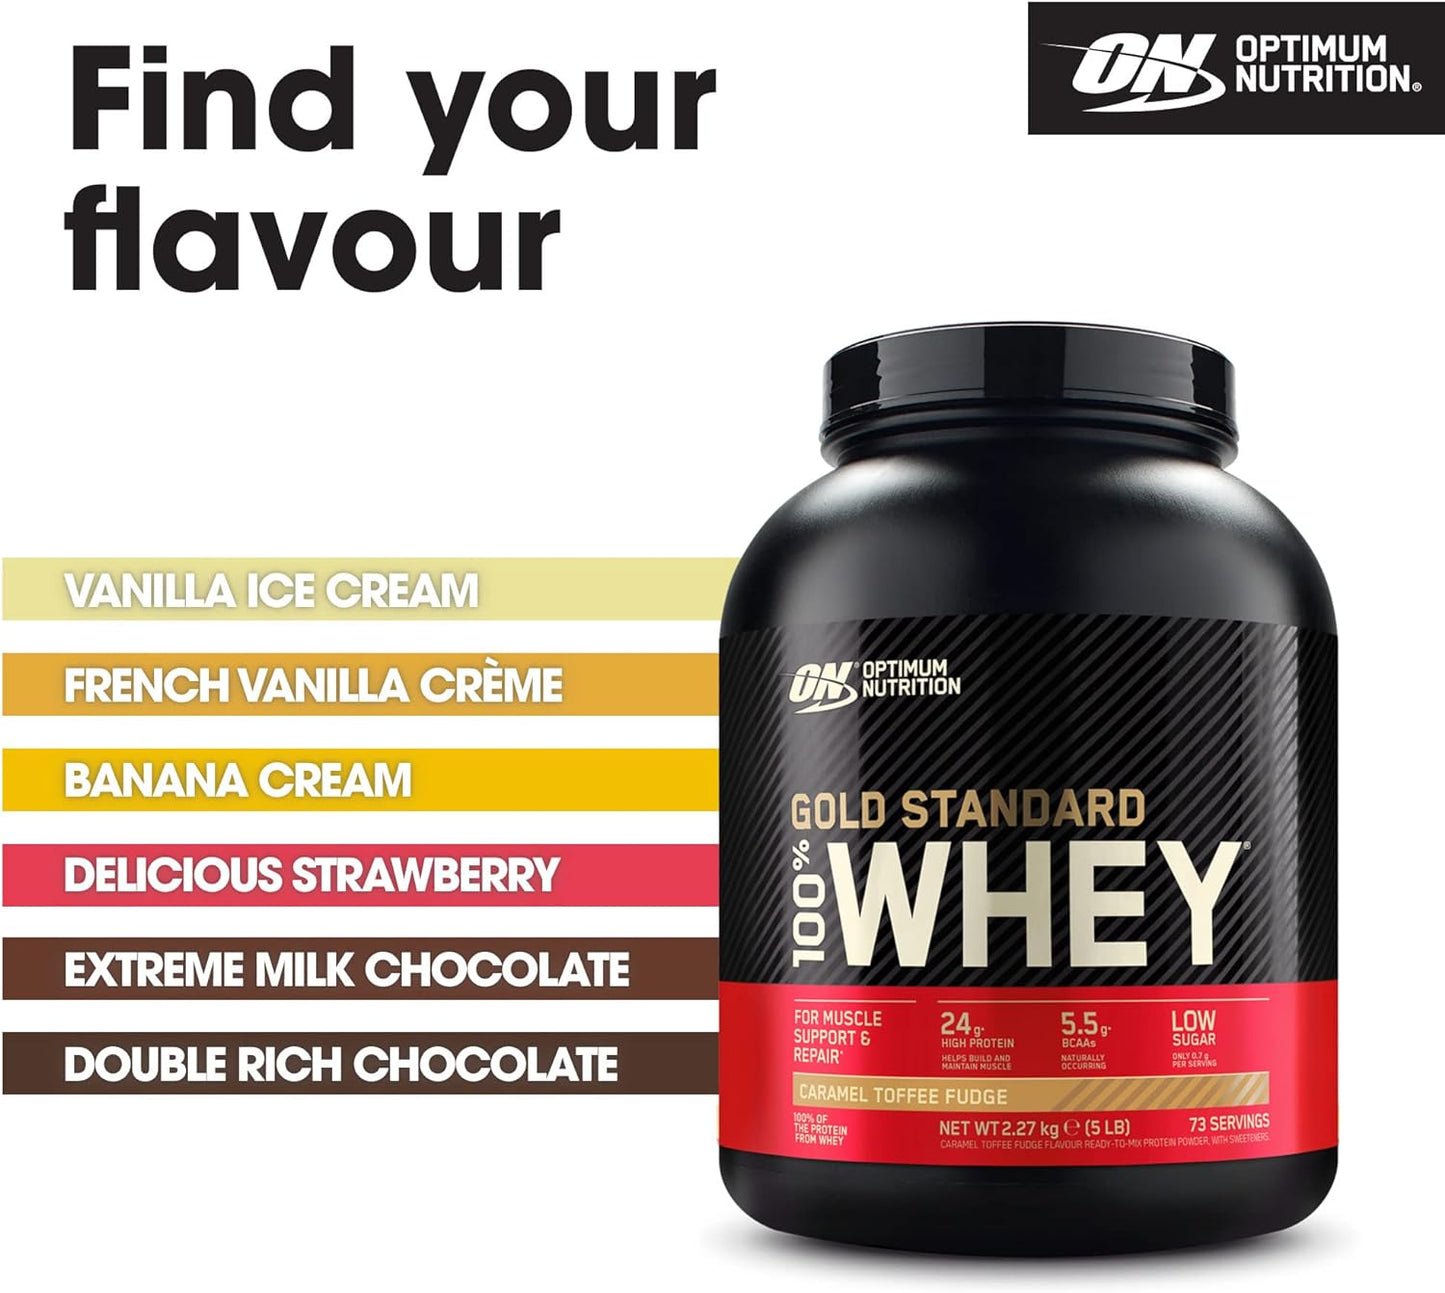 Gold Standard 100% Whey Muscle Building and Recovery Protein Powder with Naturally Occurring Glutamine and BCAA Amino Acids, Caramel Toffee Fudge Flavour, 73 Servings, 2.27 Kg